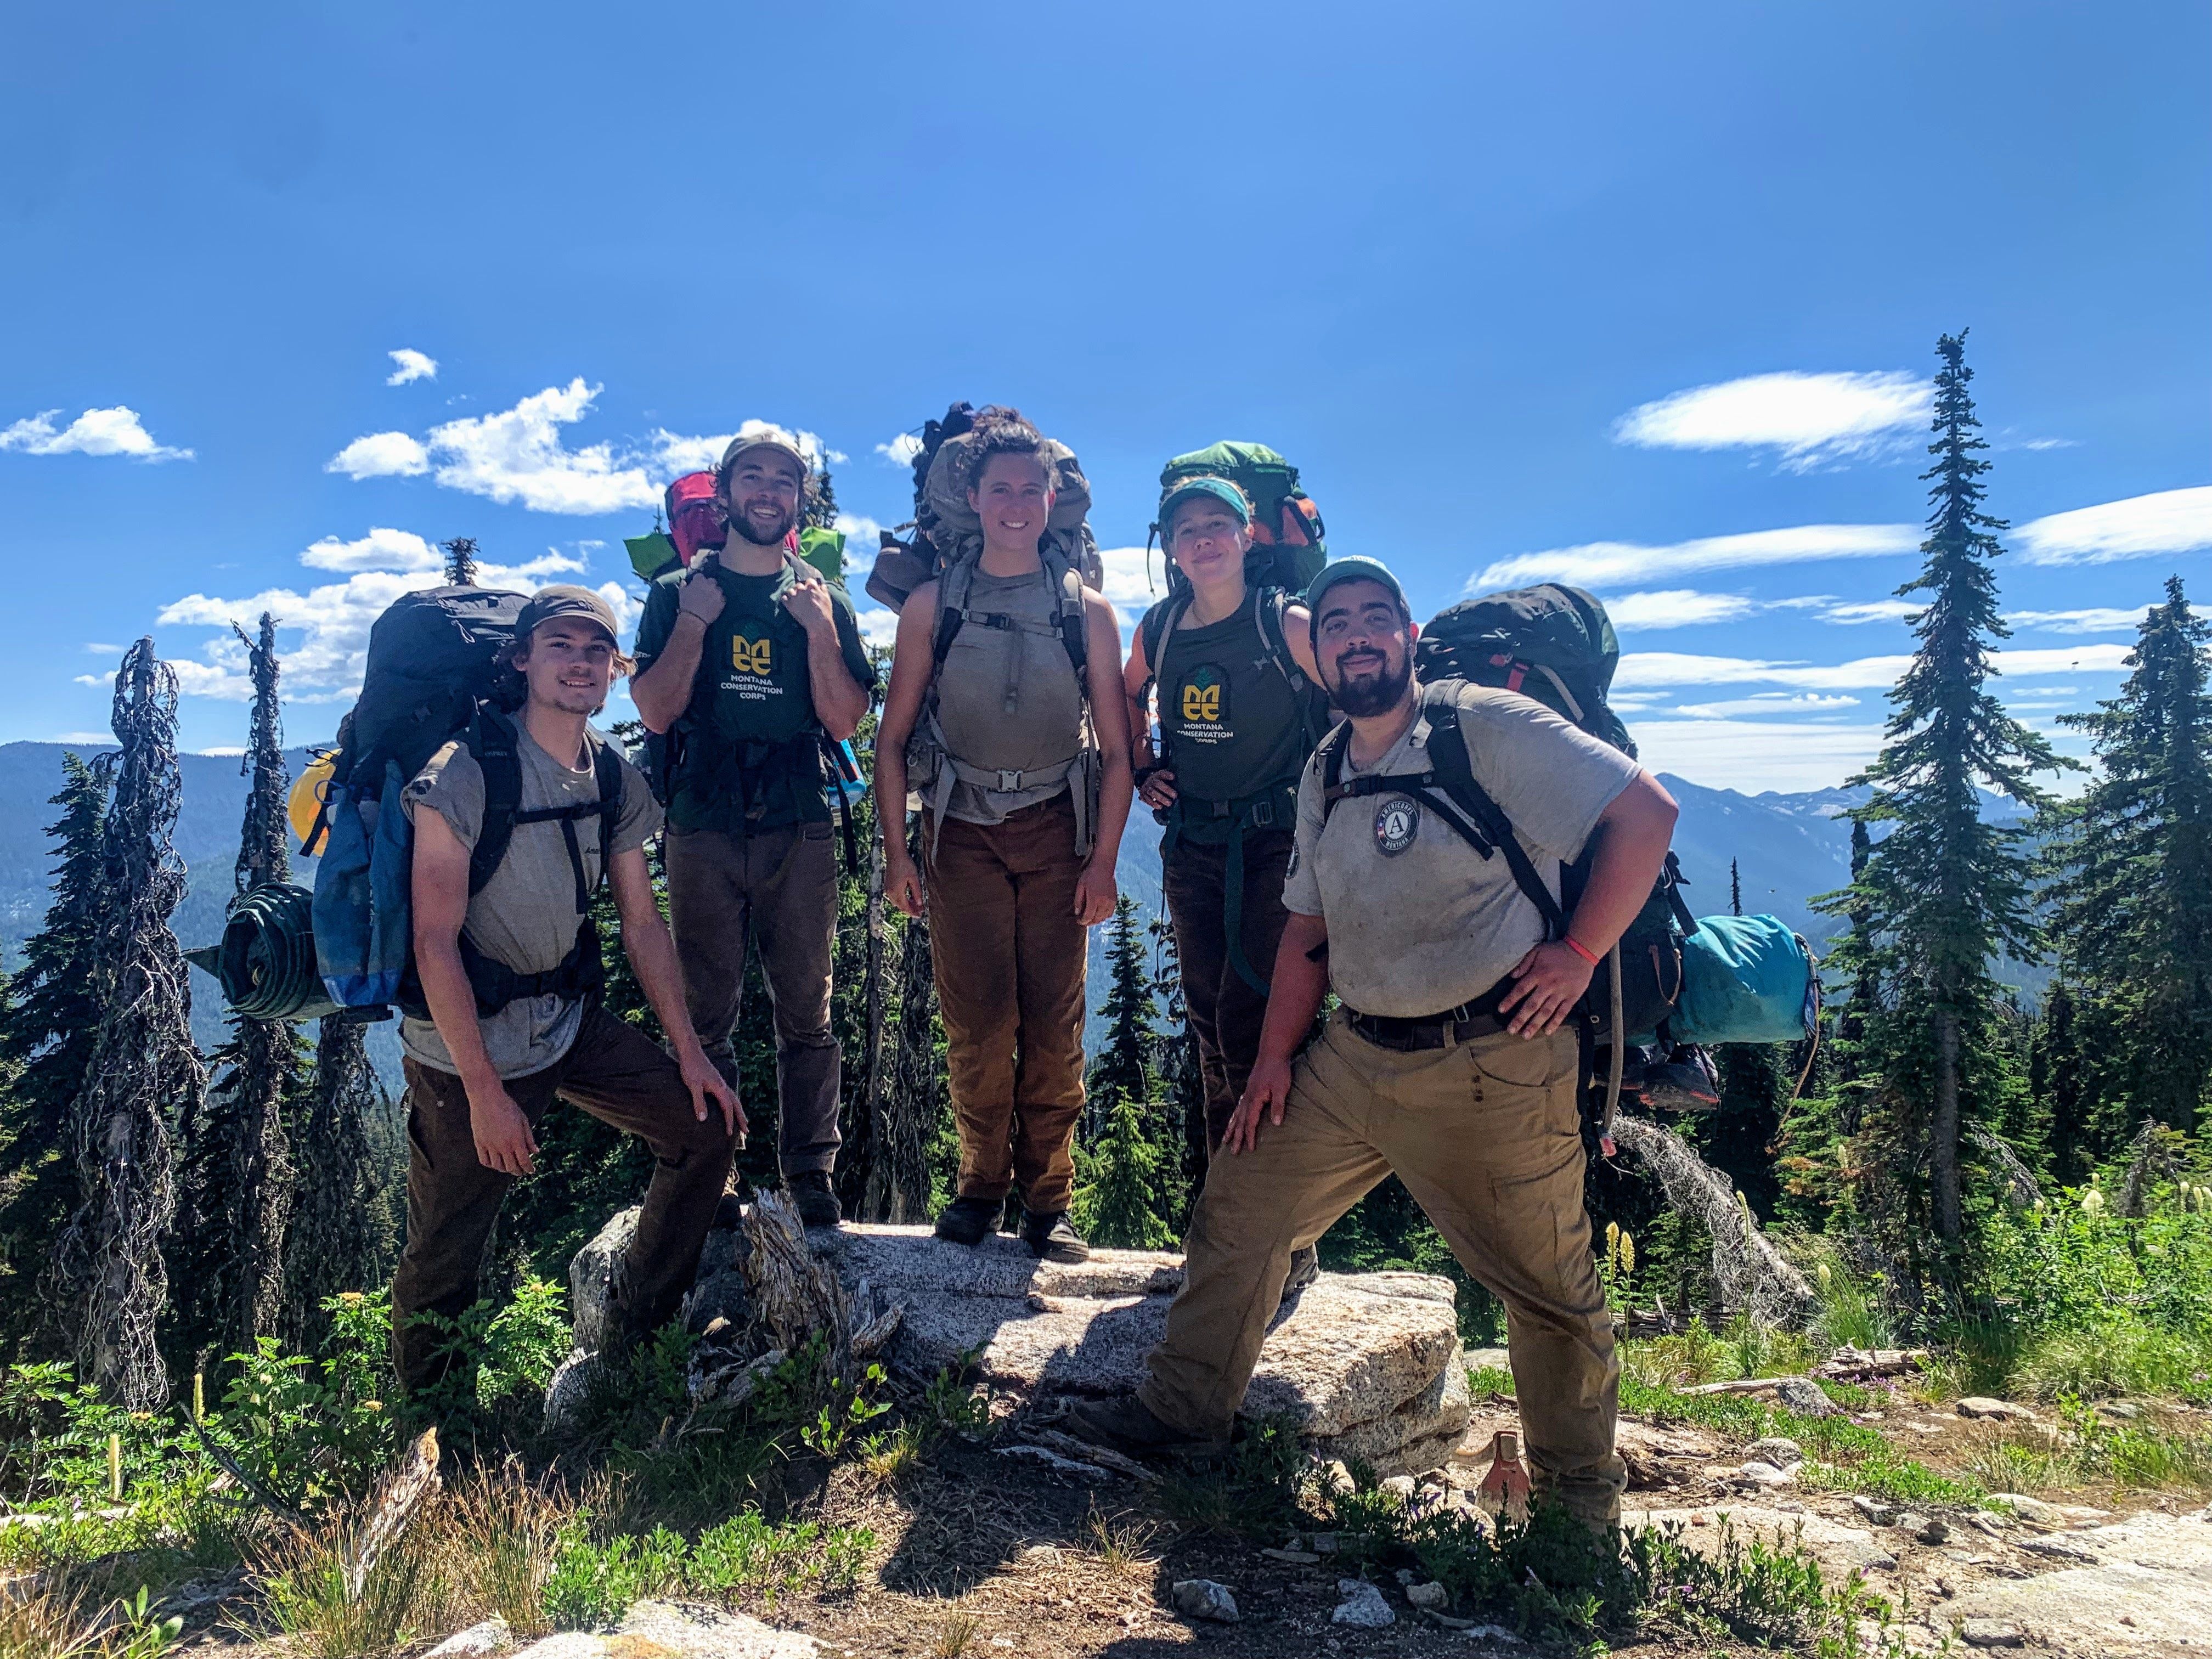 A smiling crew poses standing around and on a rock. They are all wearing backpacks.